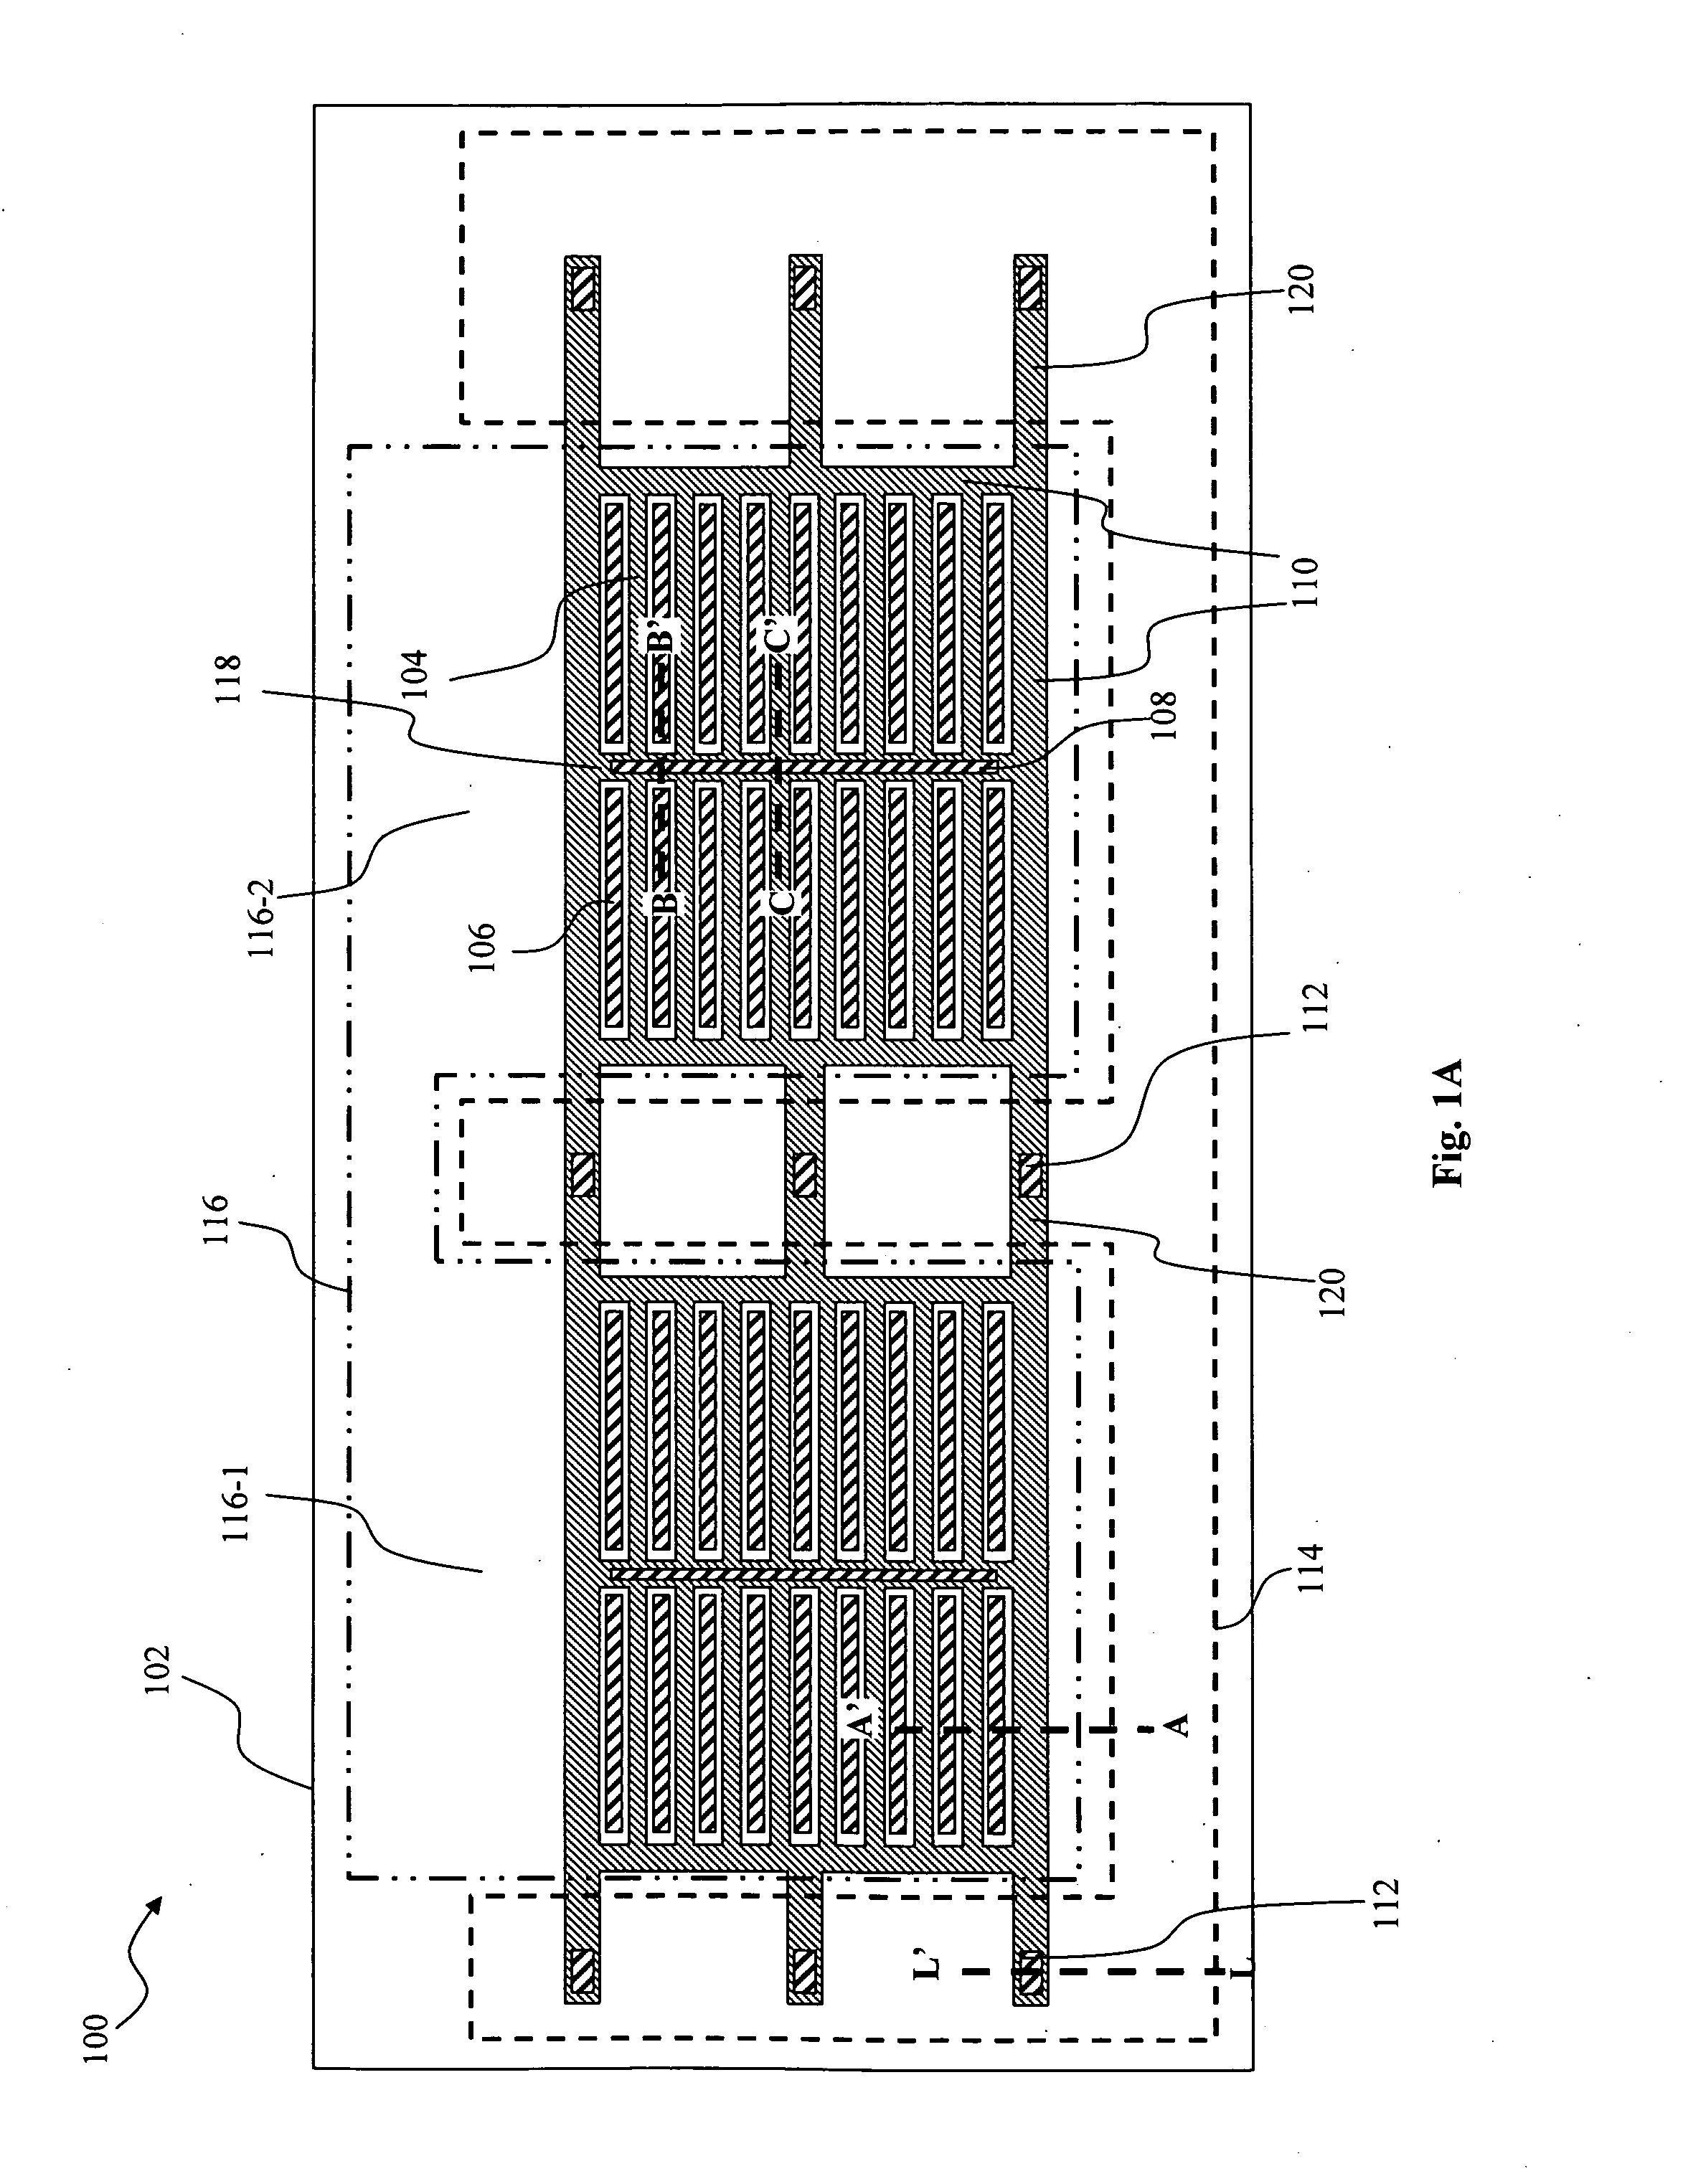 Shielded gate trench MOSFET device and fabrication